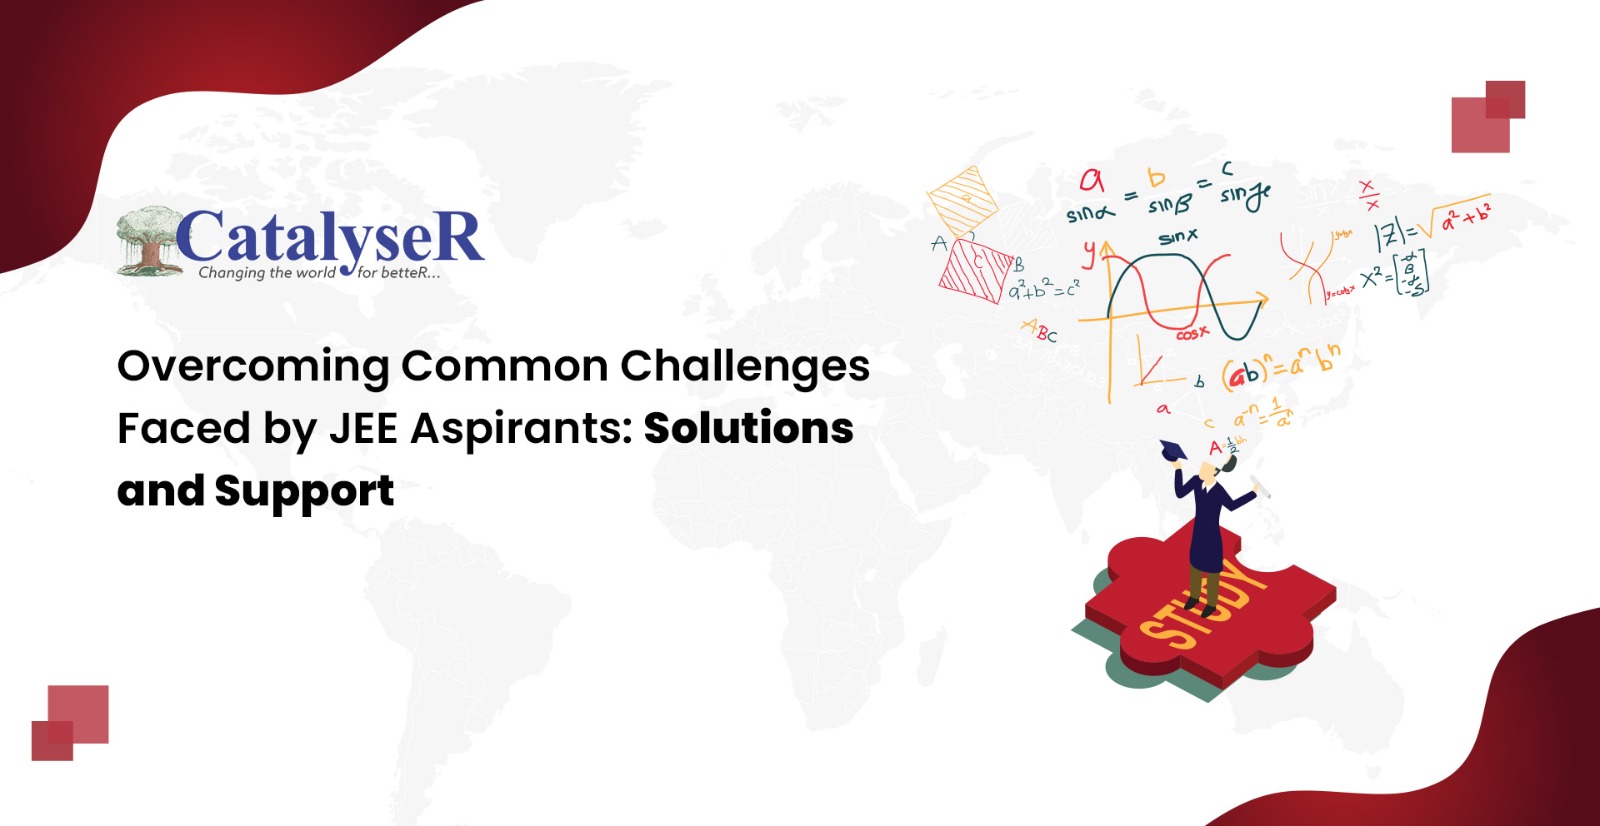 Overcoming Common Challenges Faced by JEE Aspirants: Solutions and Support